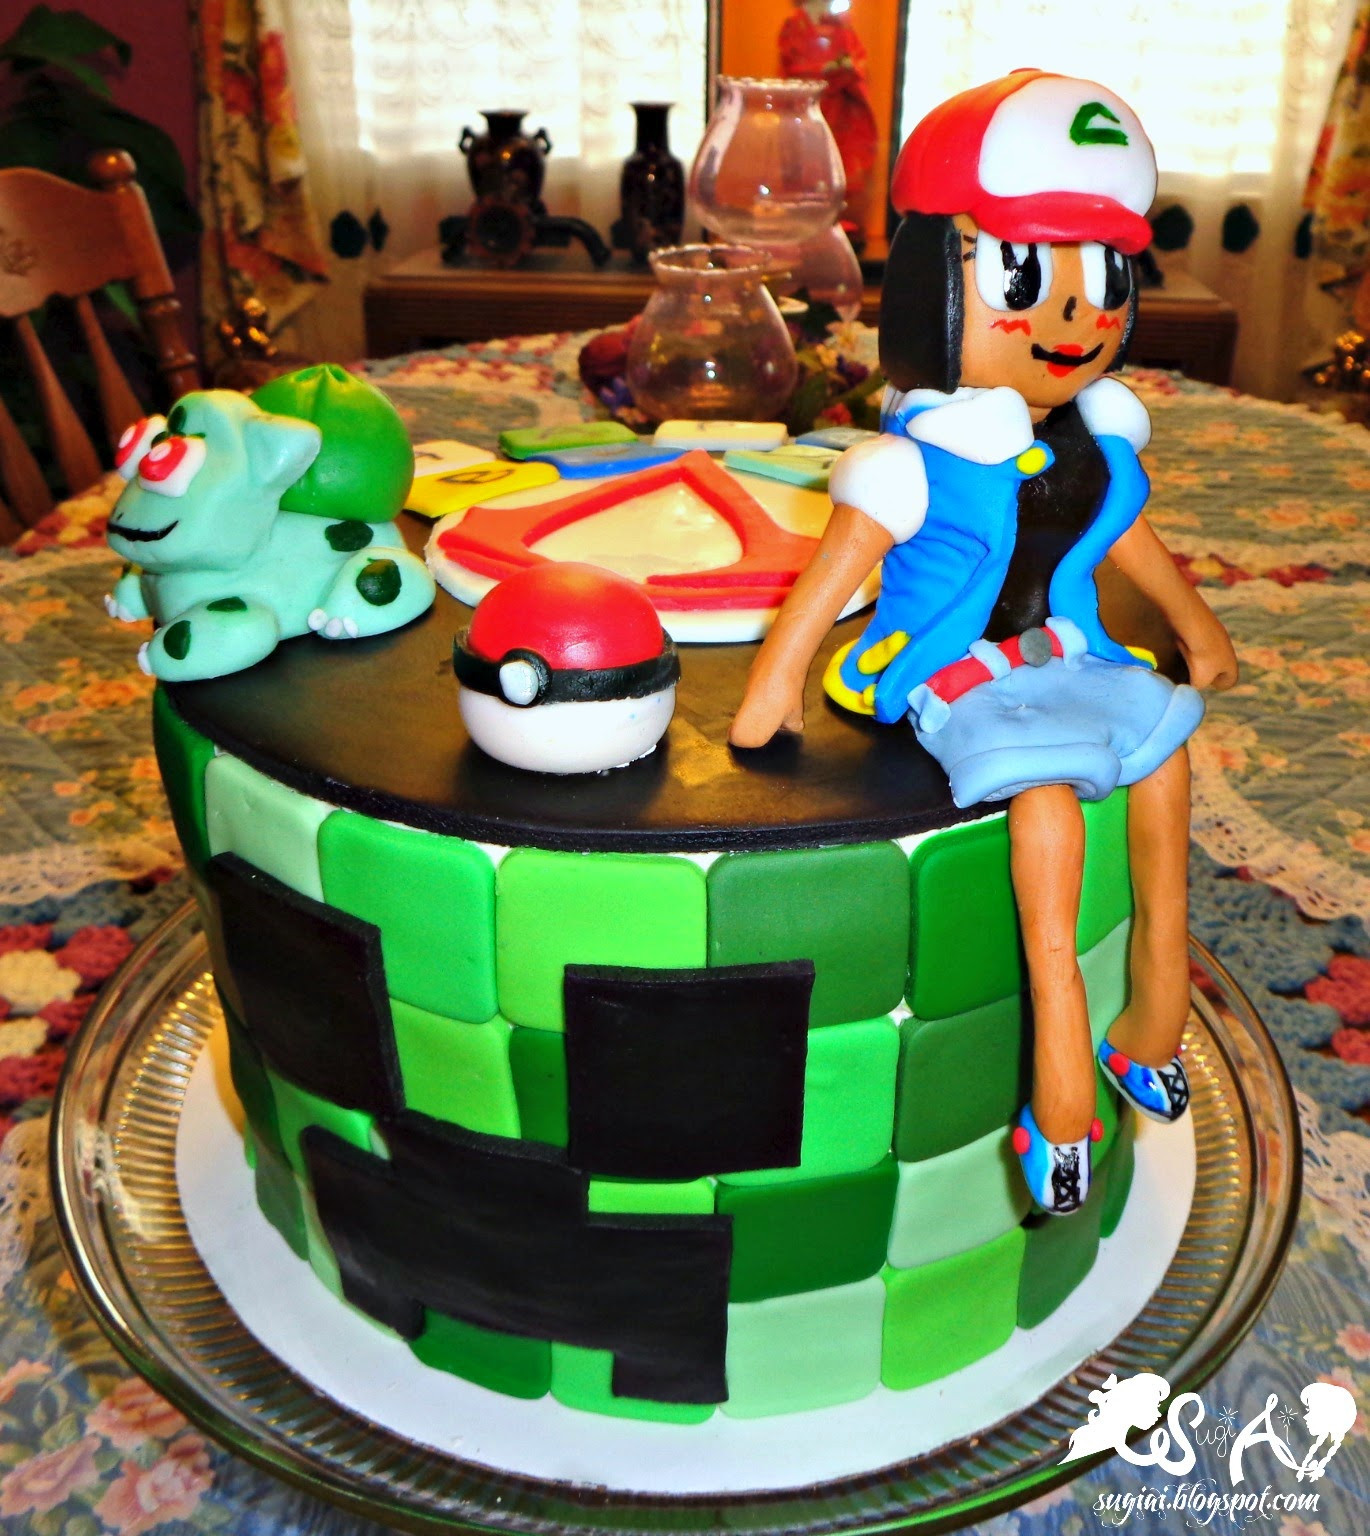 Birthday Cake Video
 SugiAi Happy St Patrick s Day and a Video Game Birthday Cake